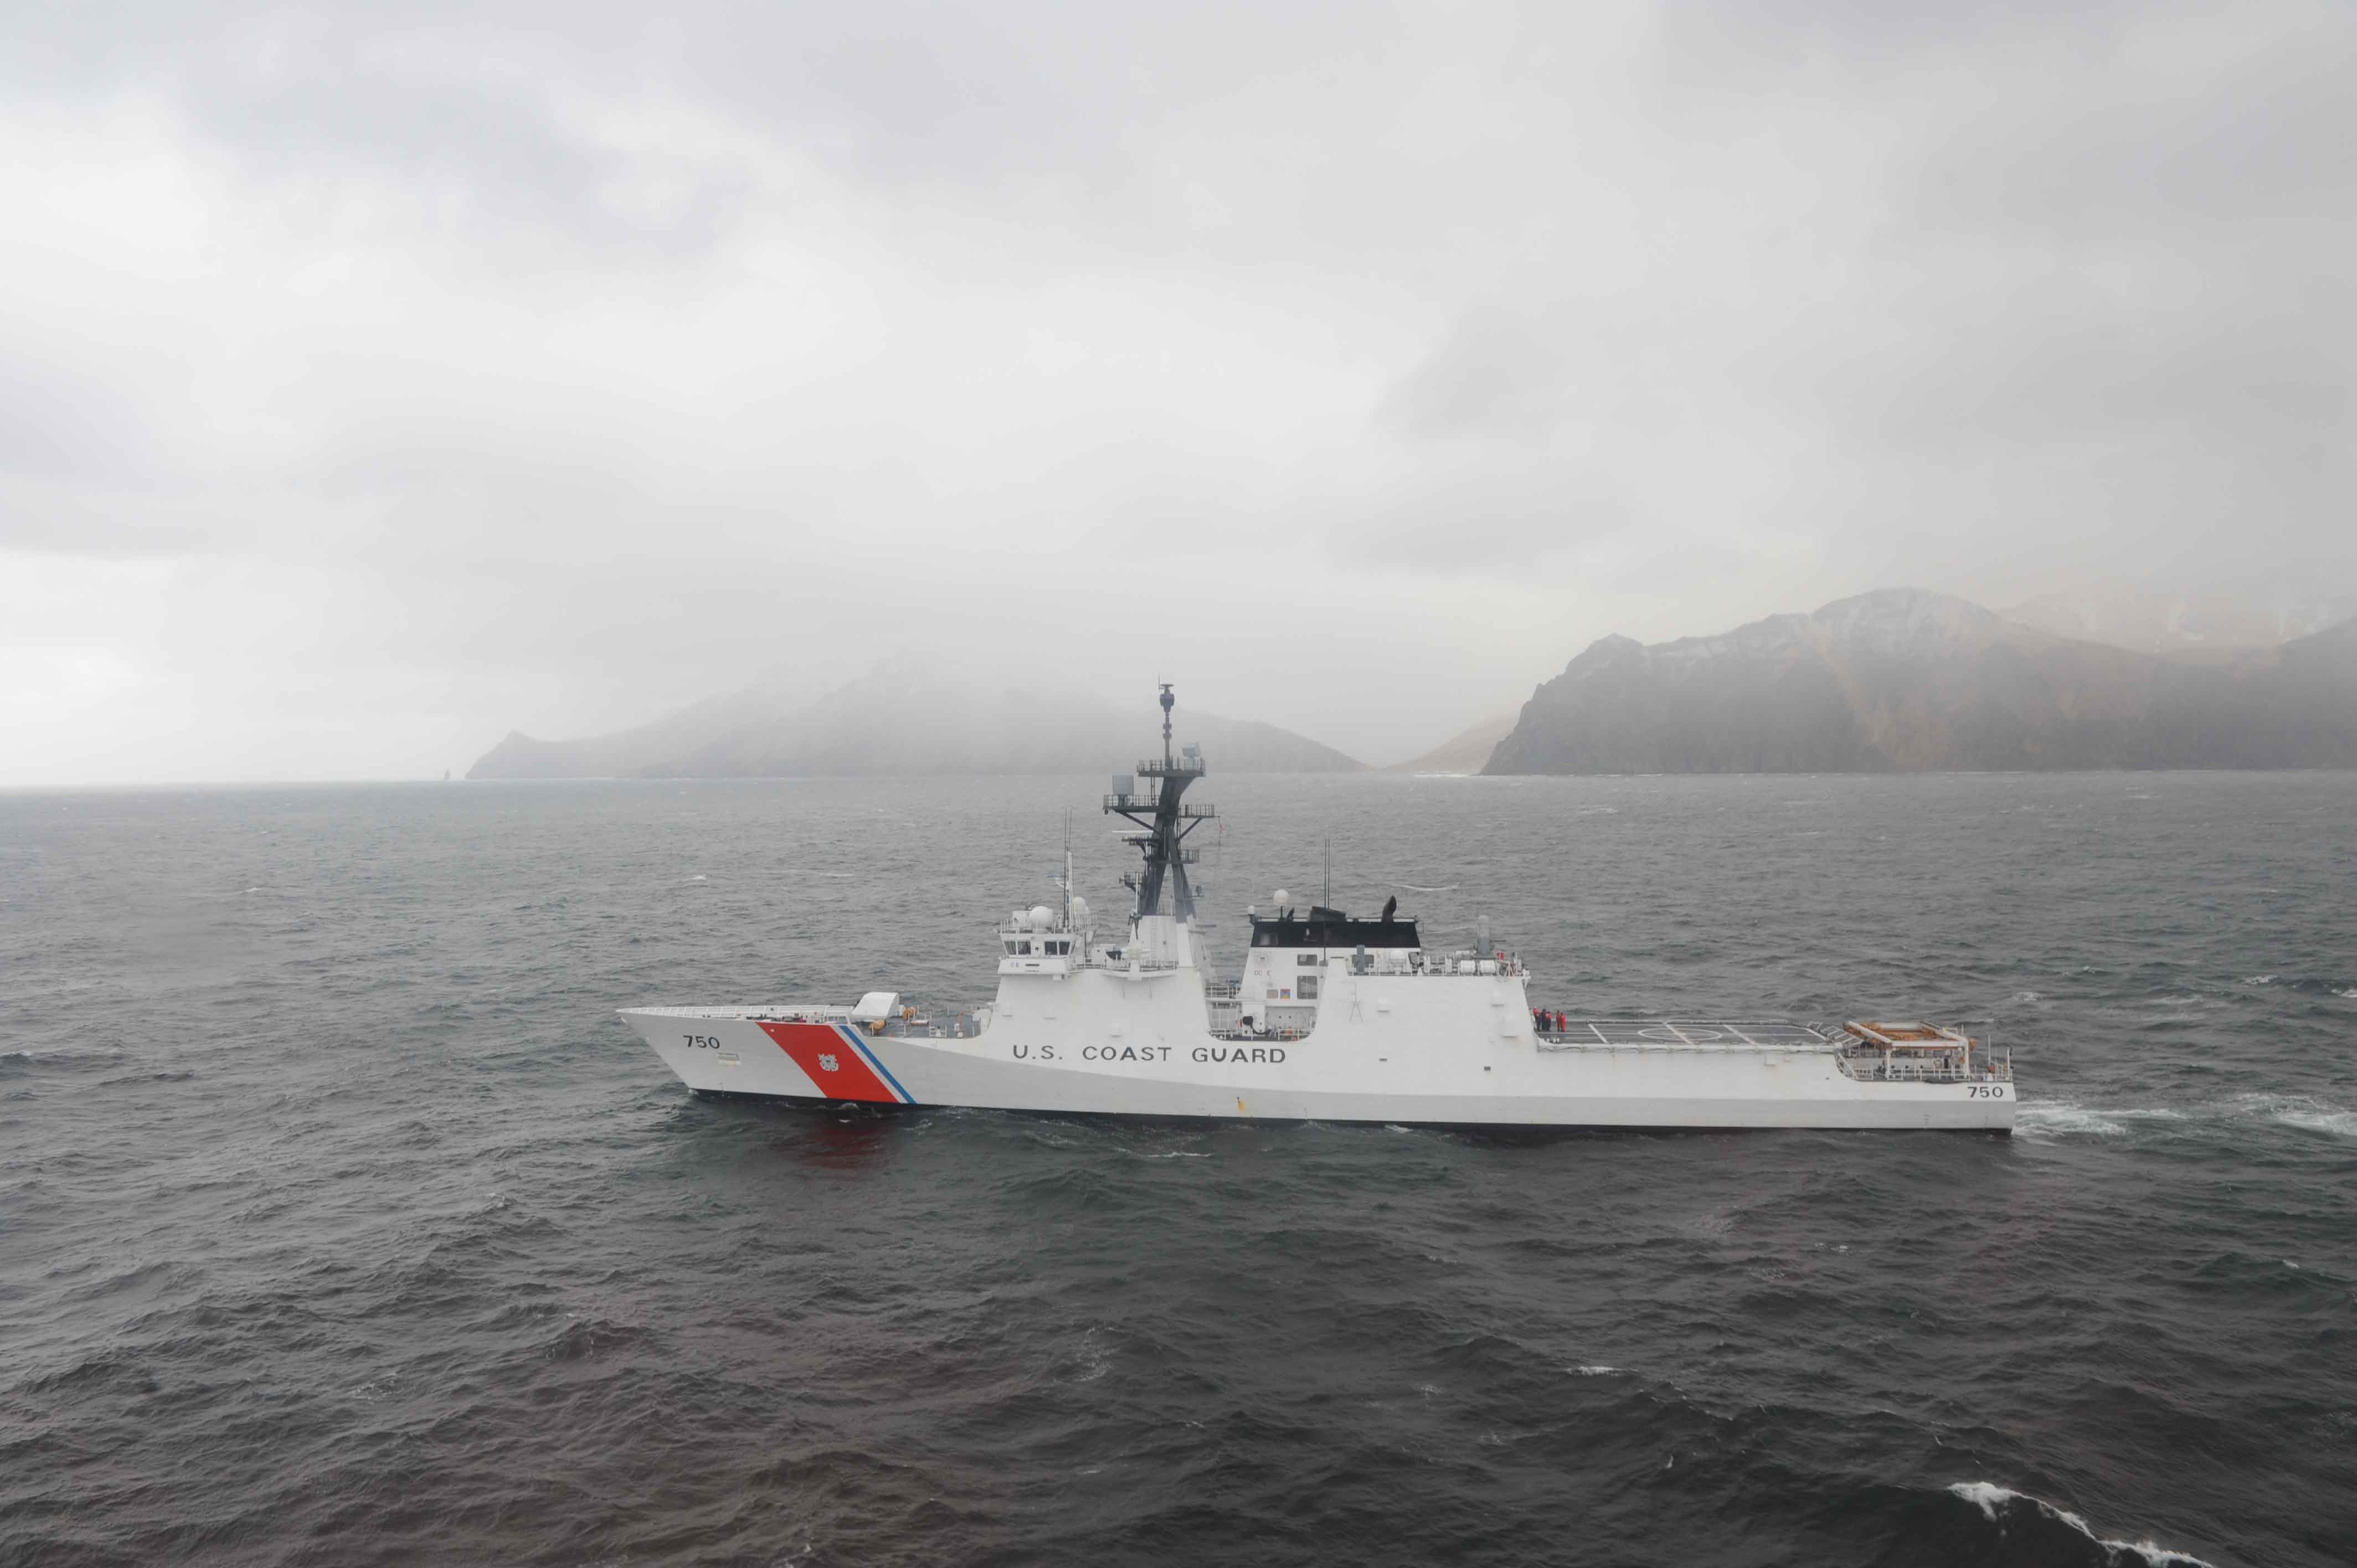 The Coast Guard Cutter Bertholf departs from Dutch Harbor May 9, 2011, to continue its first Alaska patrol in the Bering Sea. US Coast Guard Photo